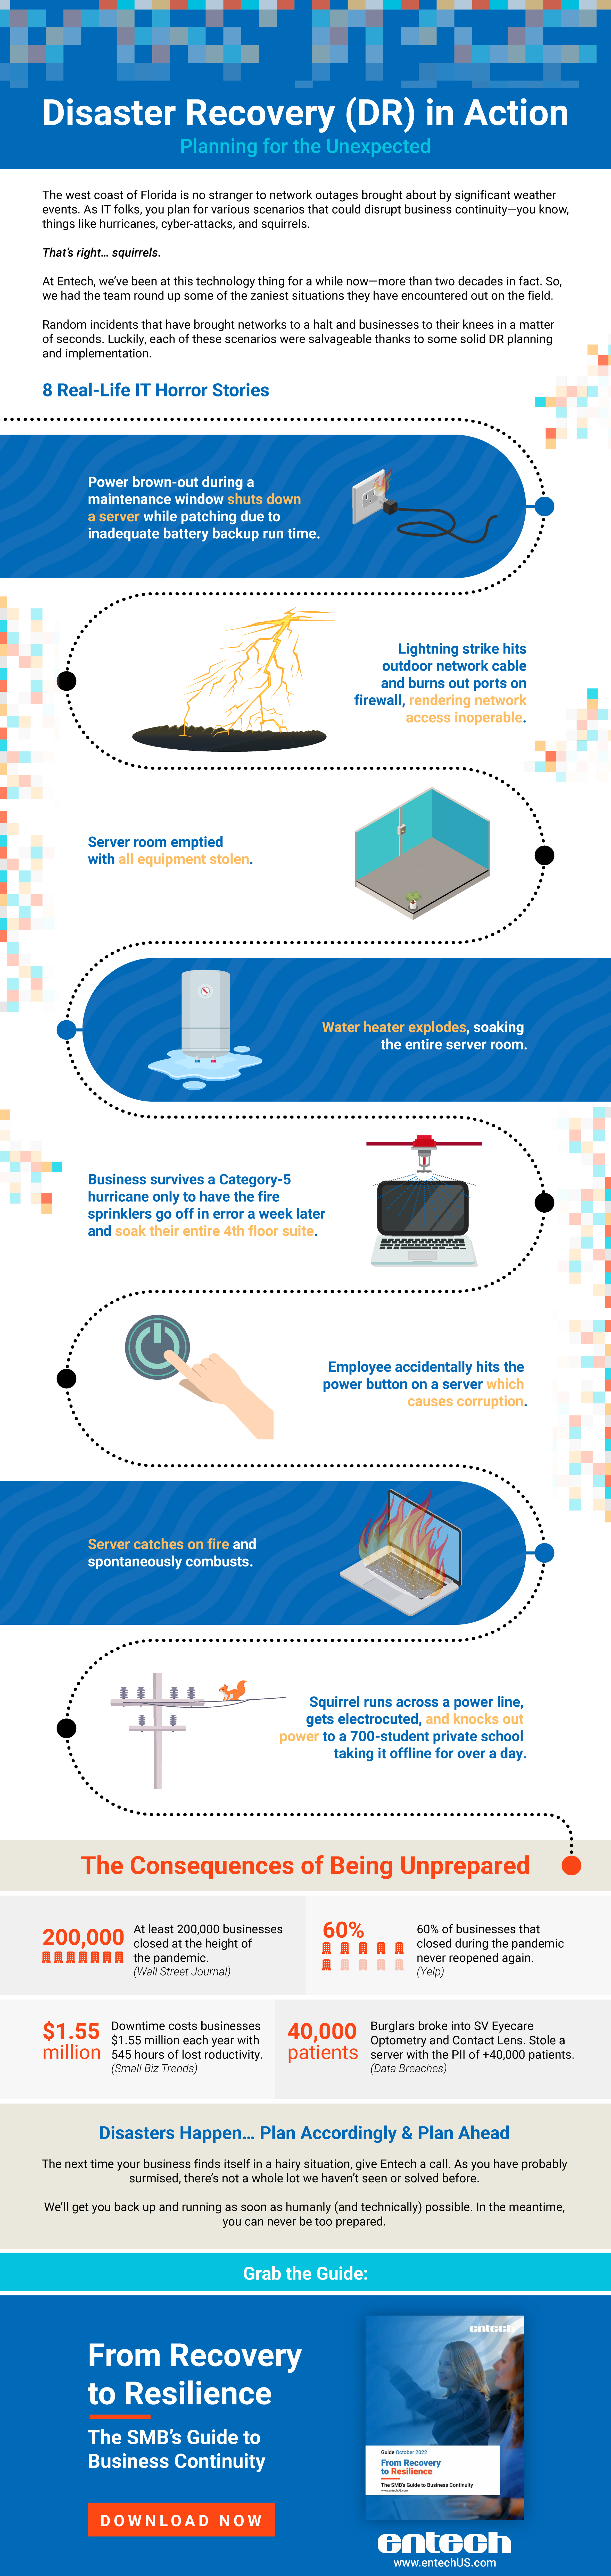 Infographic- Disaster Recovery in Action